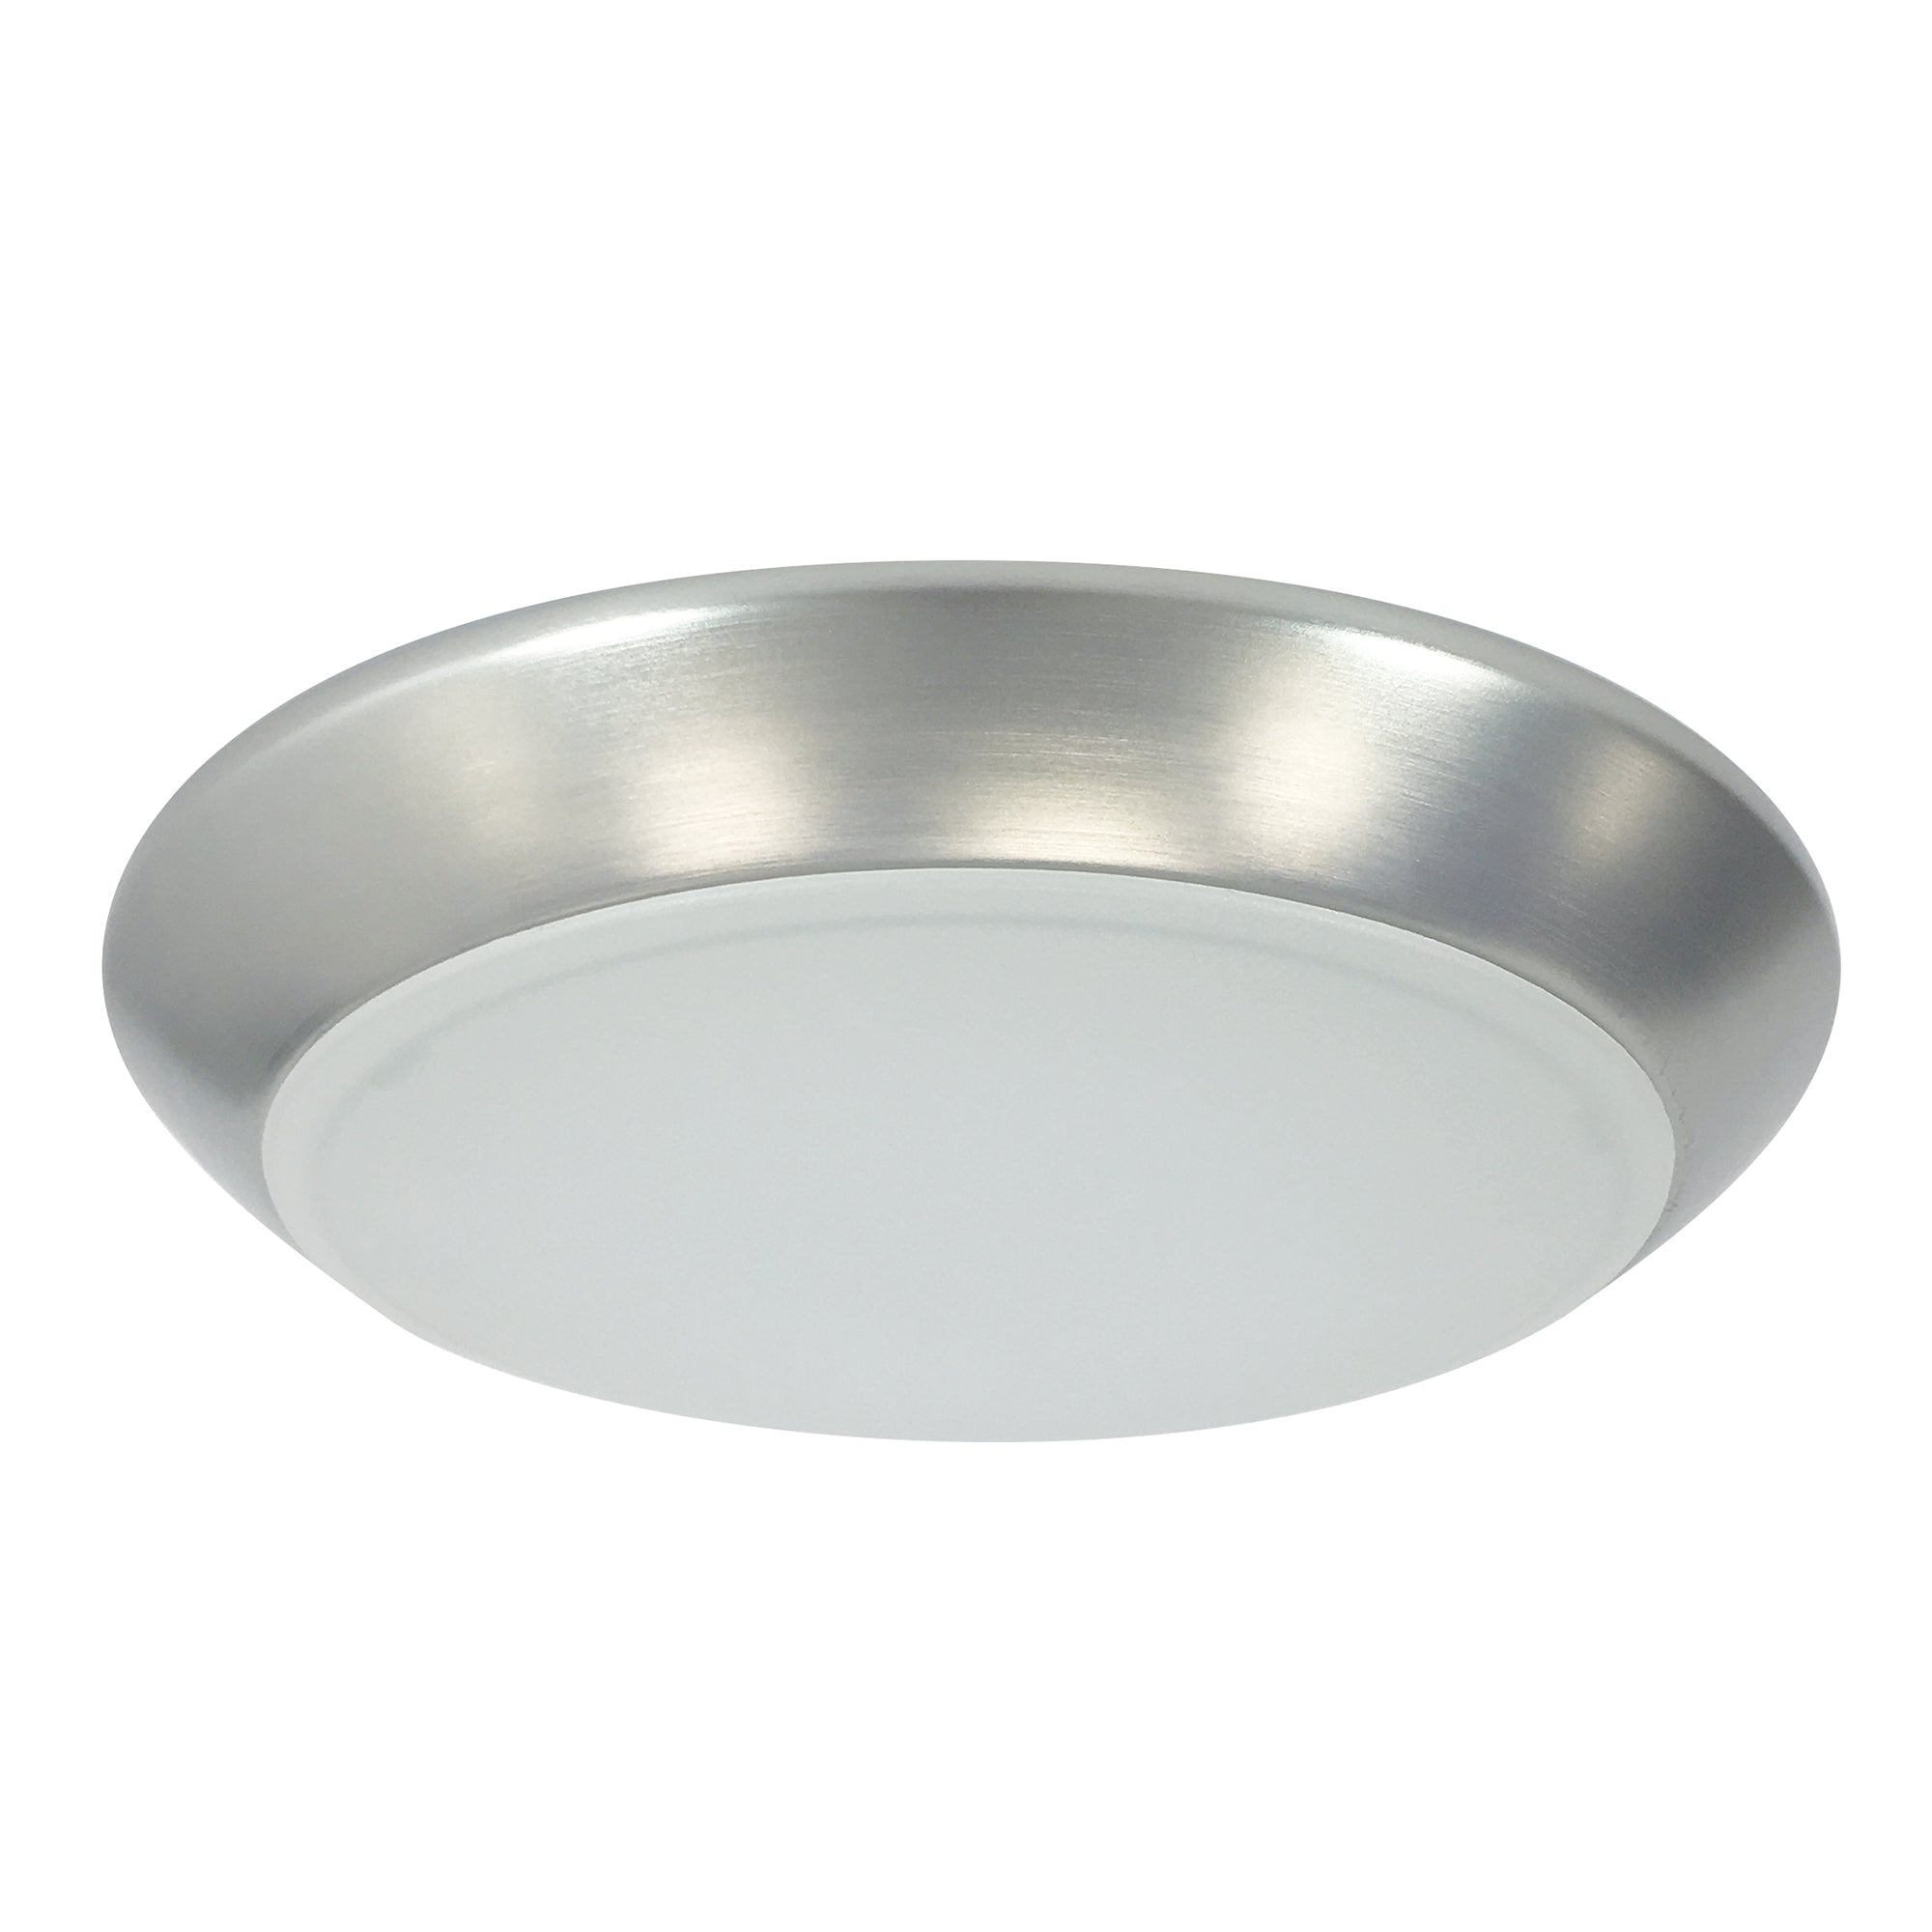 Nora Lighting NLOPAC-R8T2440NM - Surface - 8 Inch AC Opal LED Surface Mount, 2150lm / 32W, 4000K, Natural Metal finish